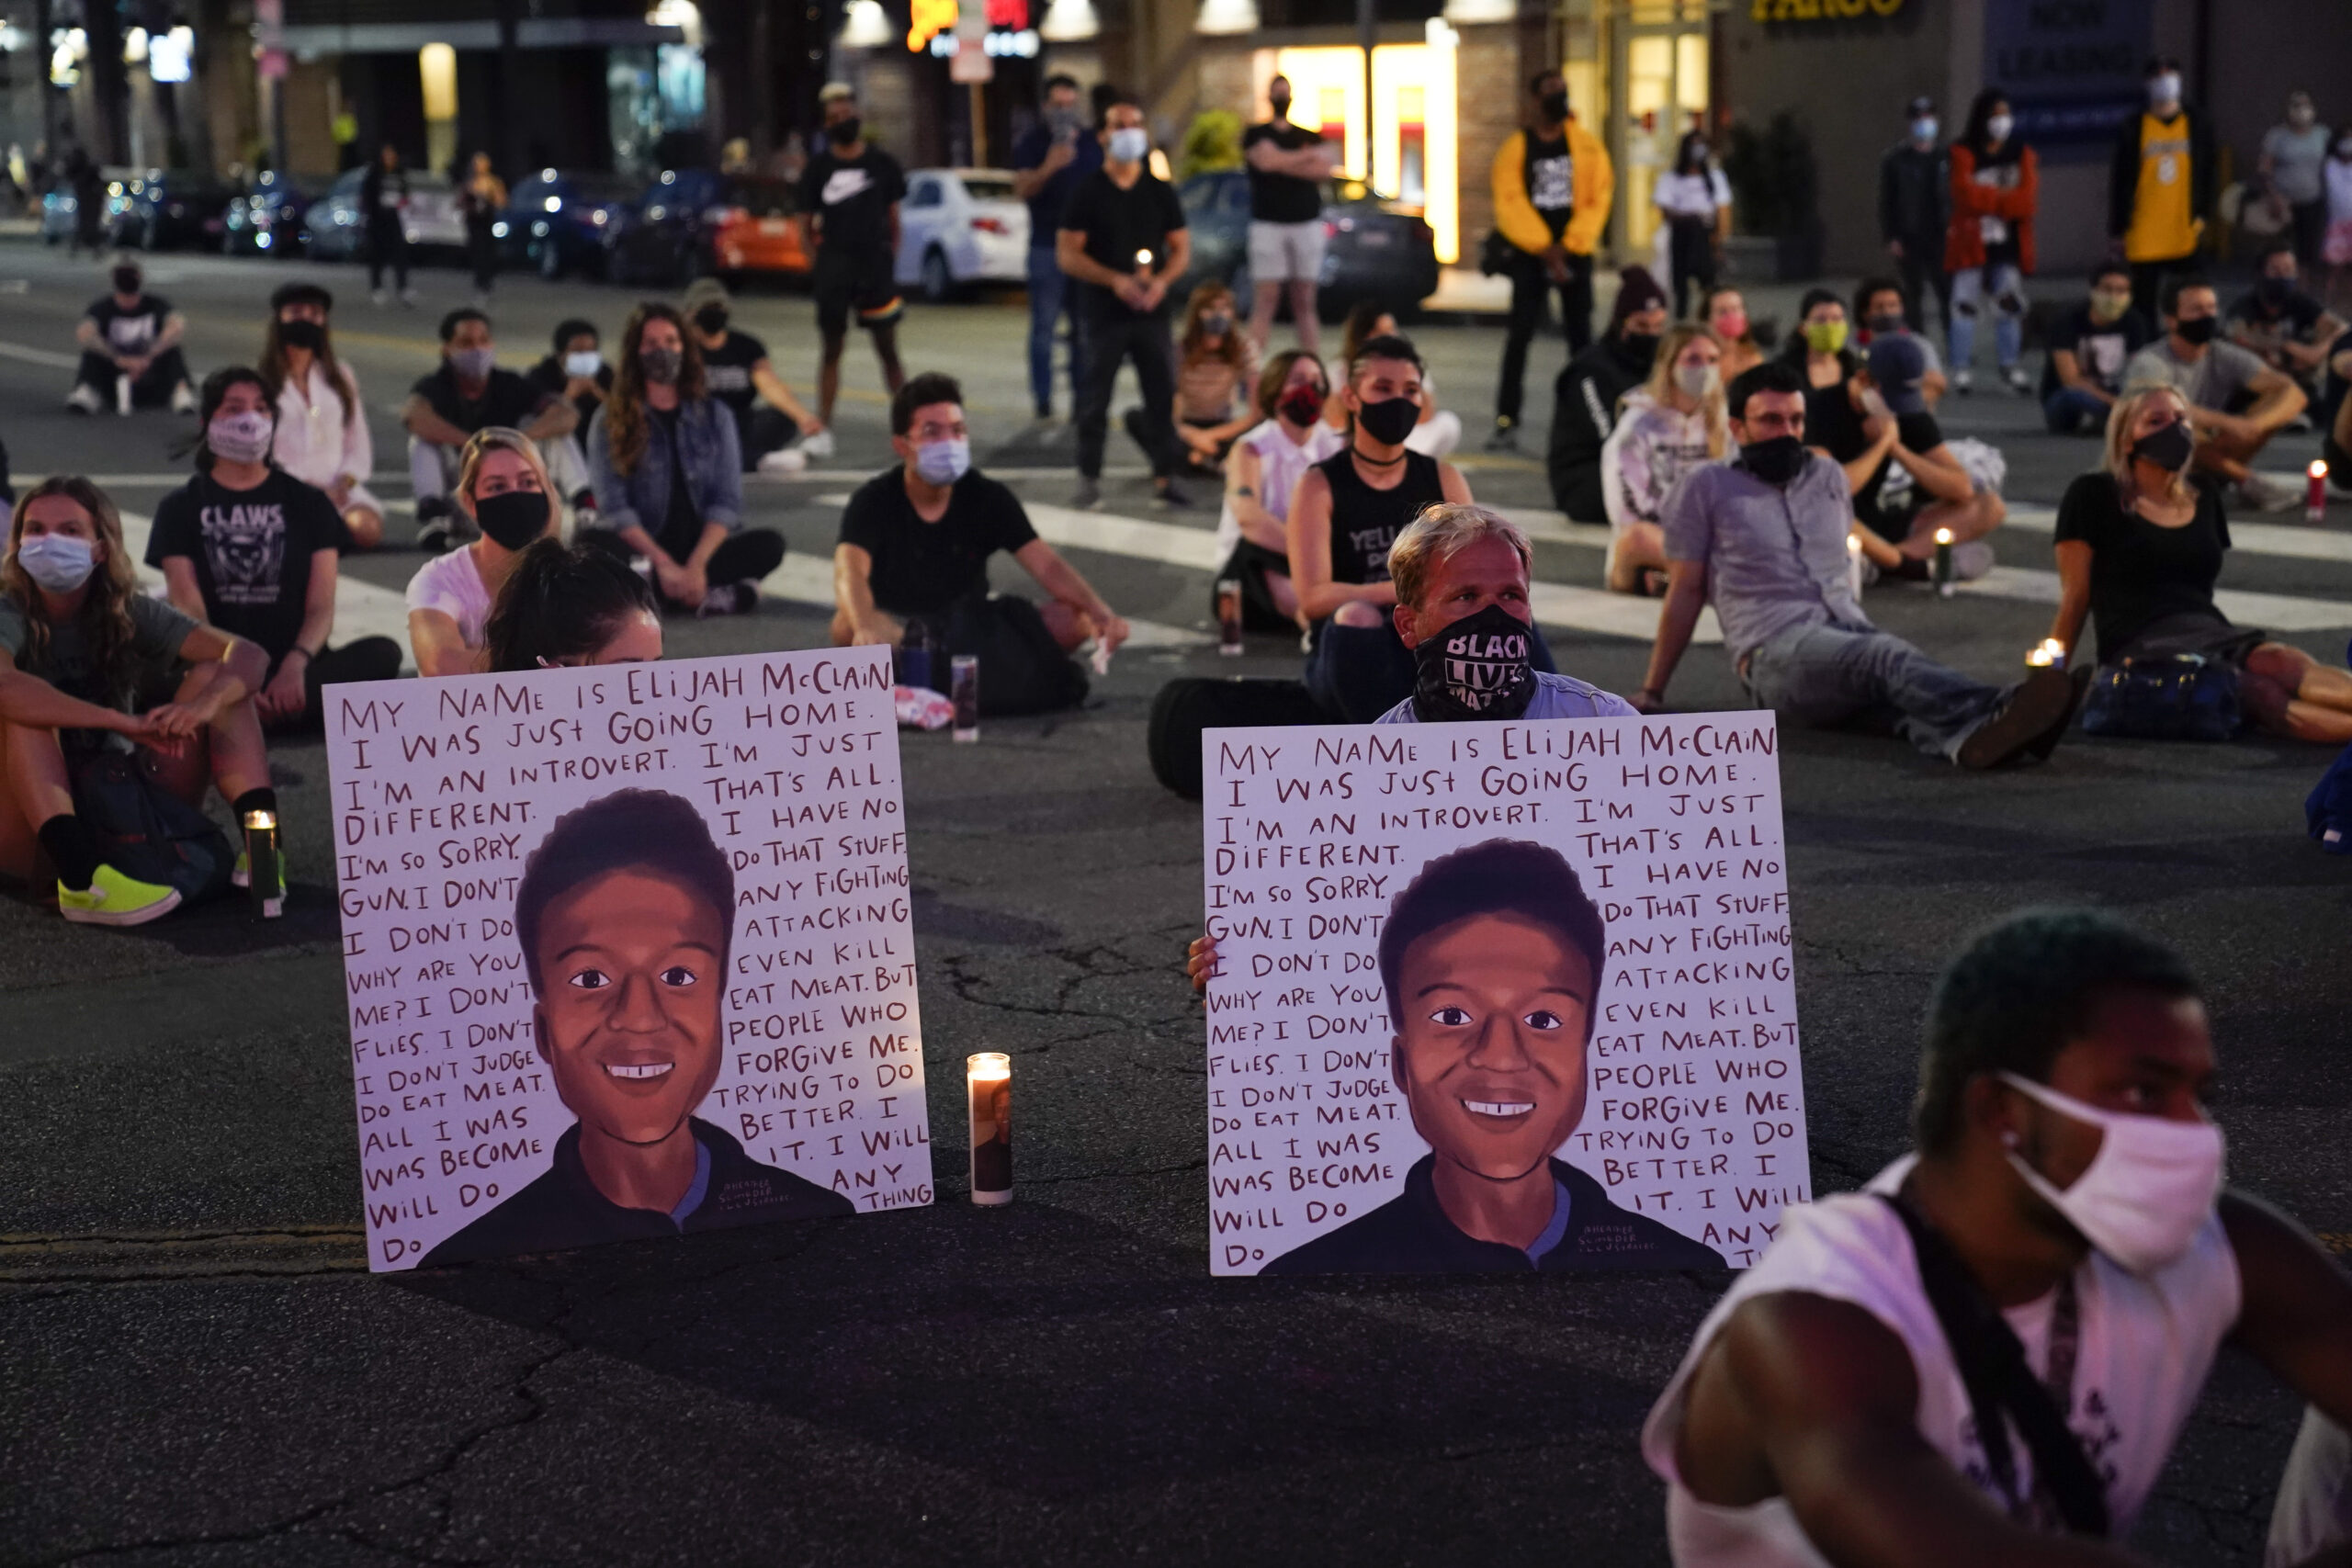 Jury selection has begun in Brighton, Colorado, in the trial of Elijah McClain, a young, Black massage therapist who died Aug. 30, 2019 after he was forcibly restrained by police. Photo credit: The Associated Press